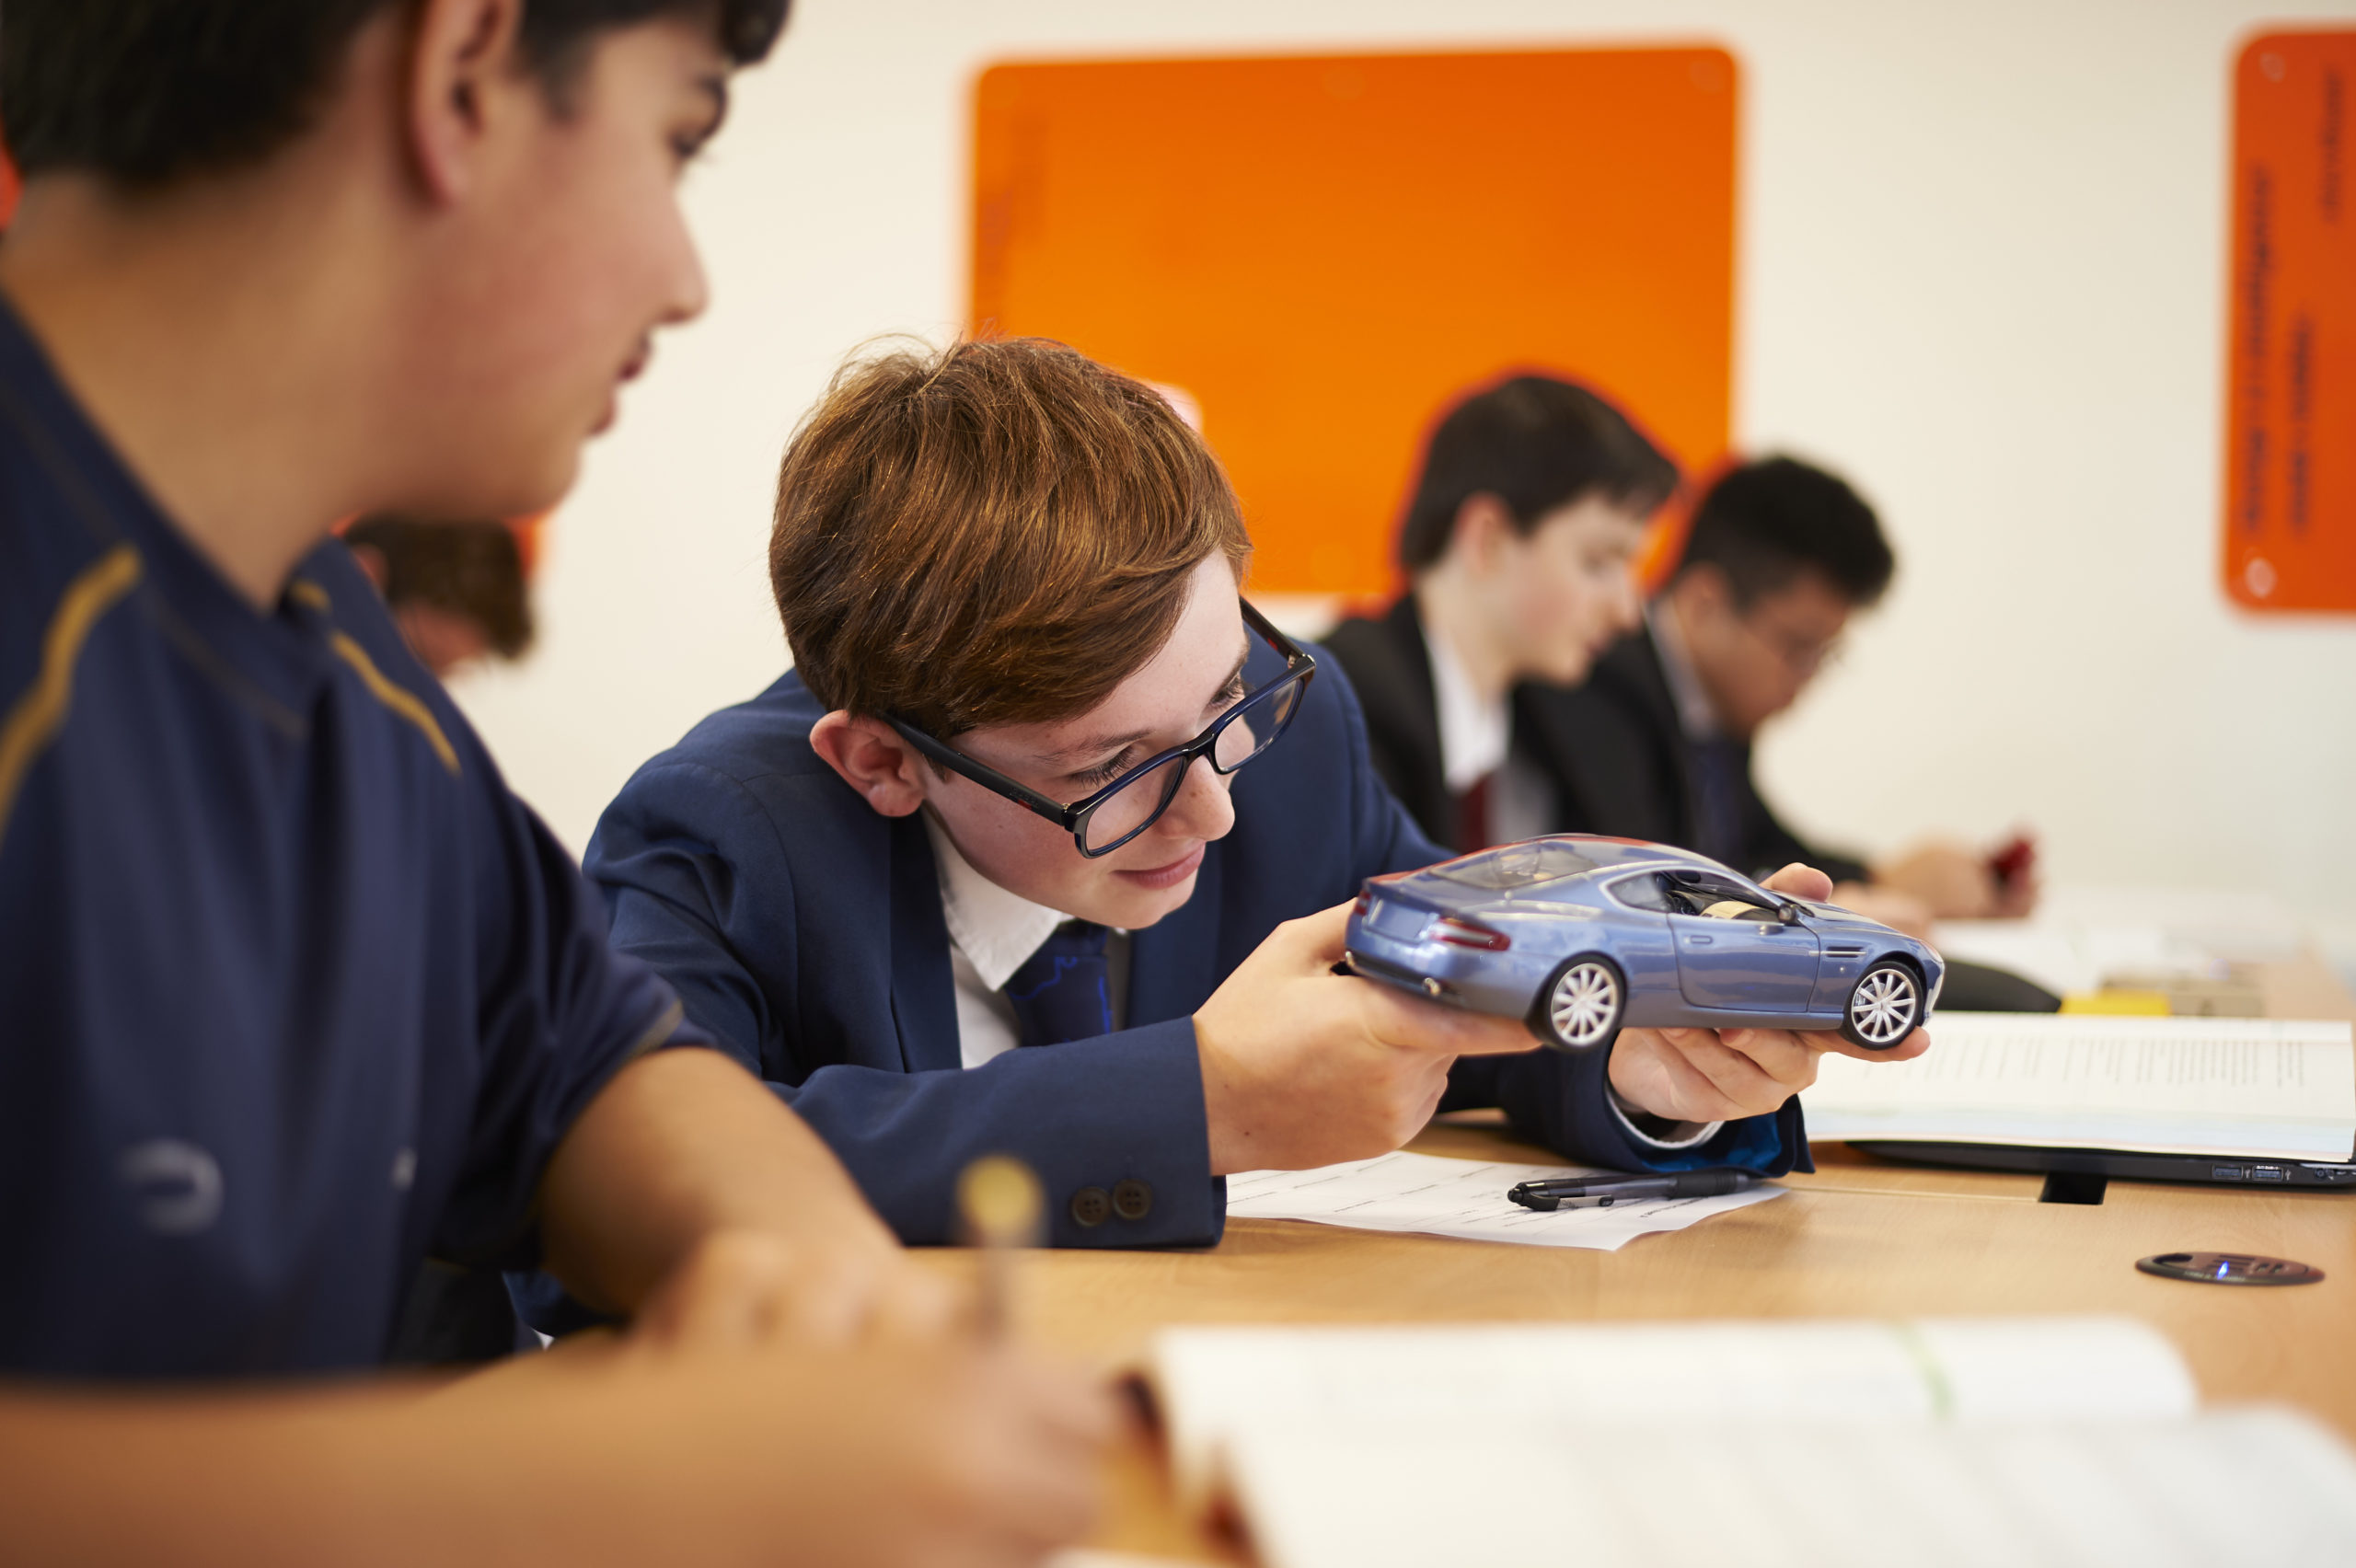 Student looking closely at model car